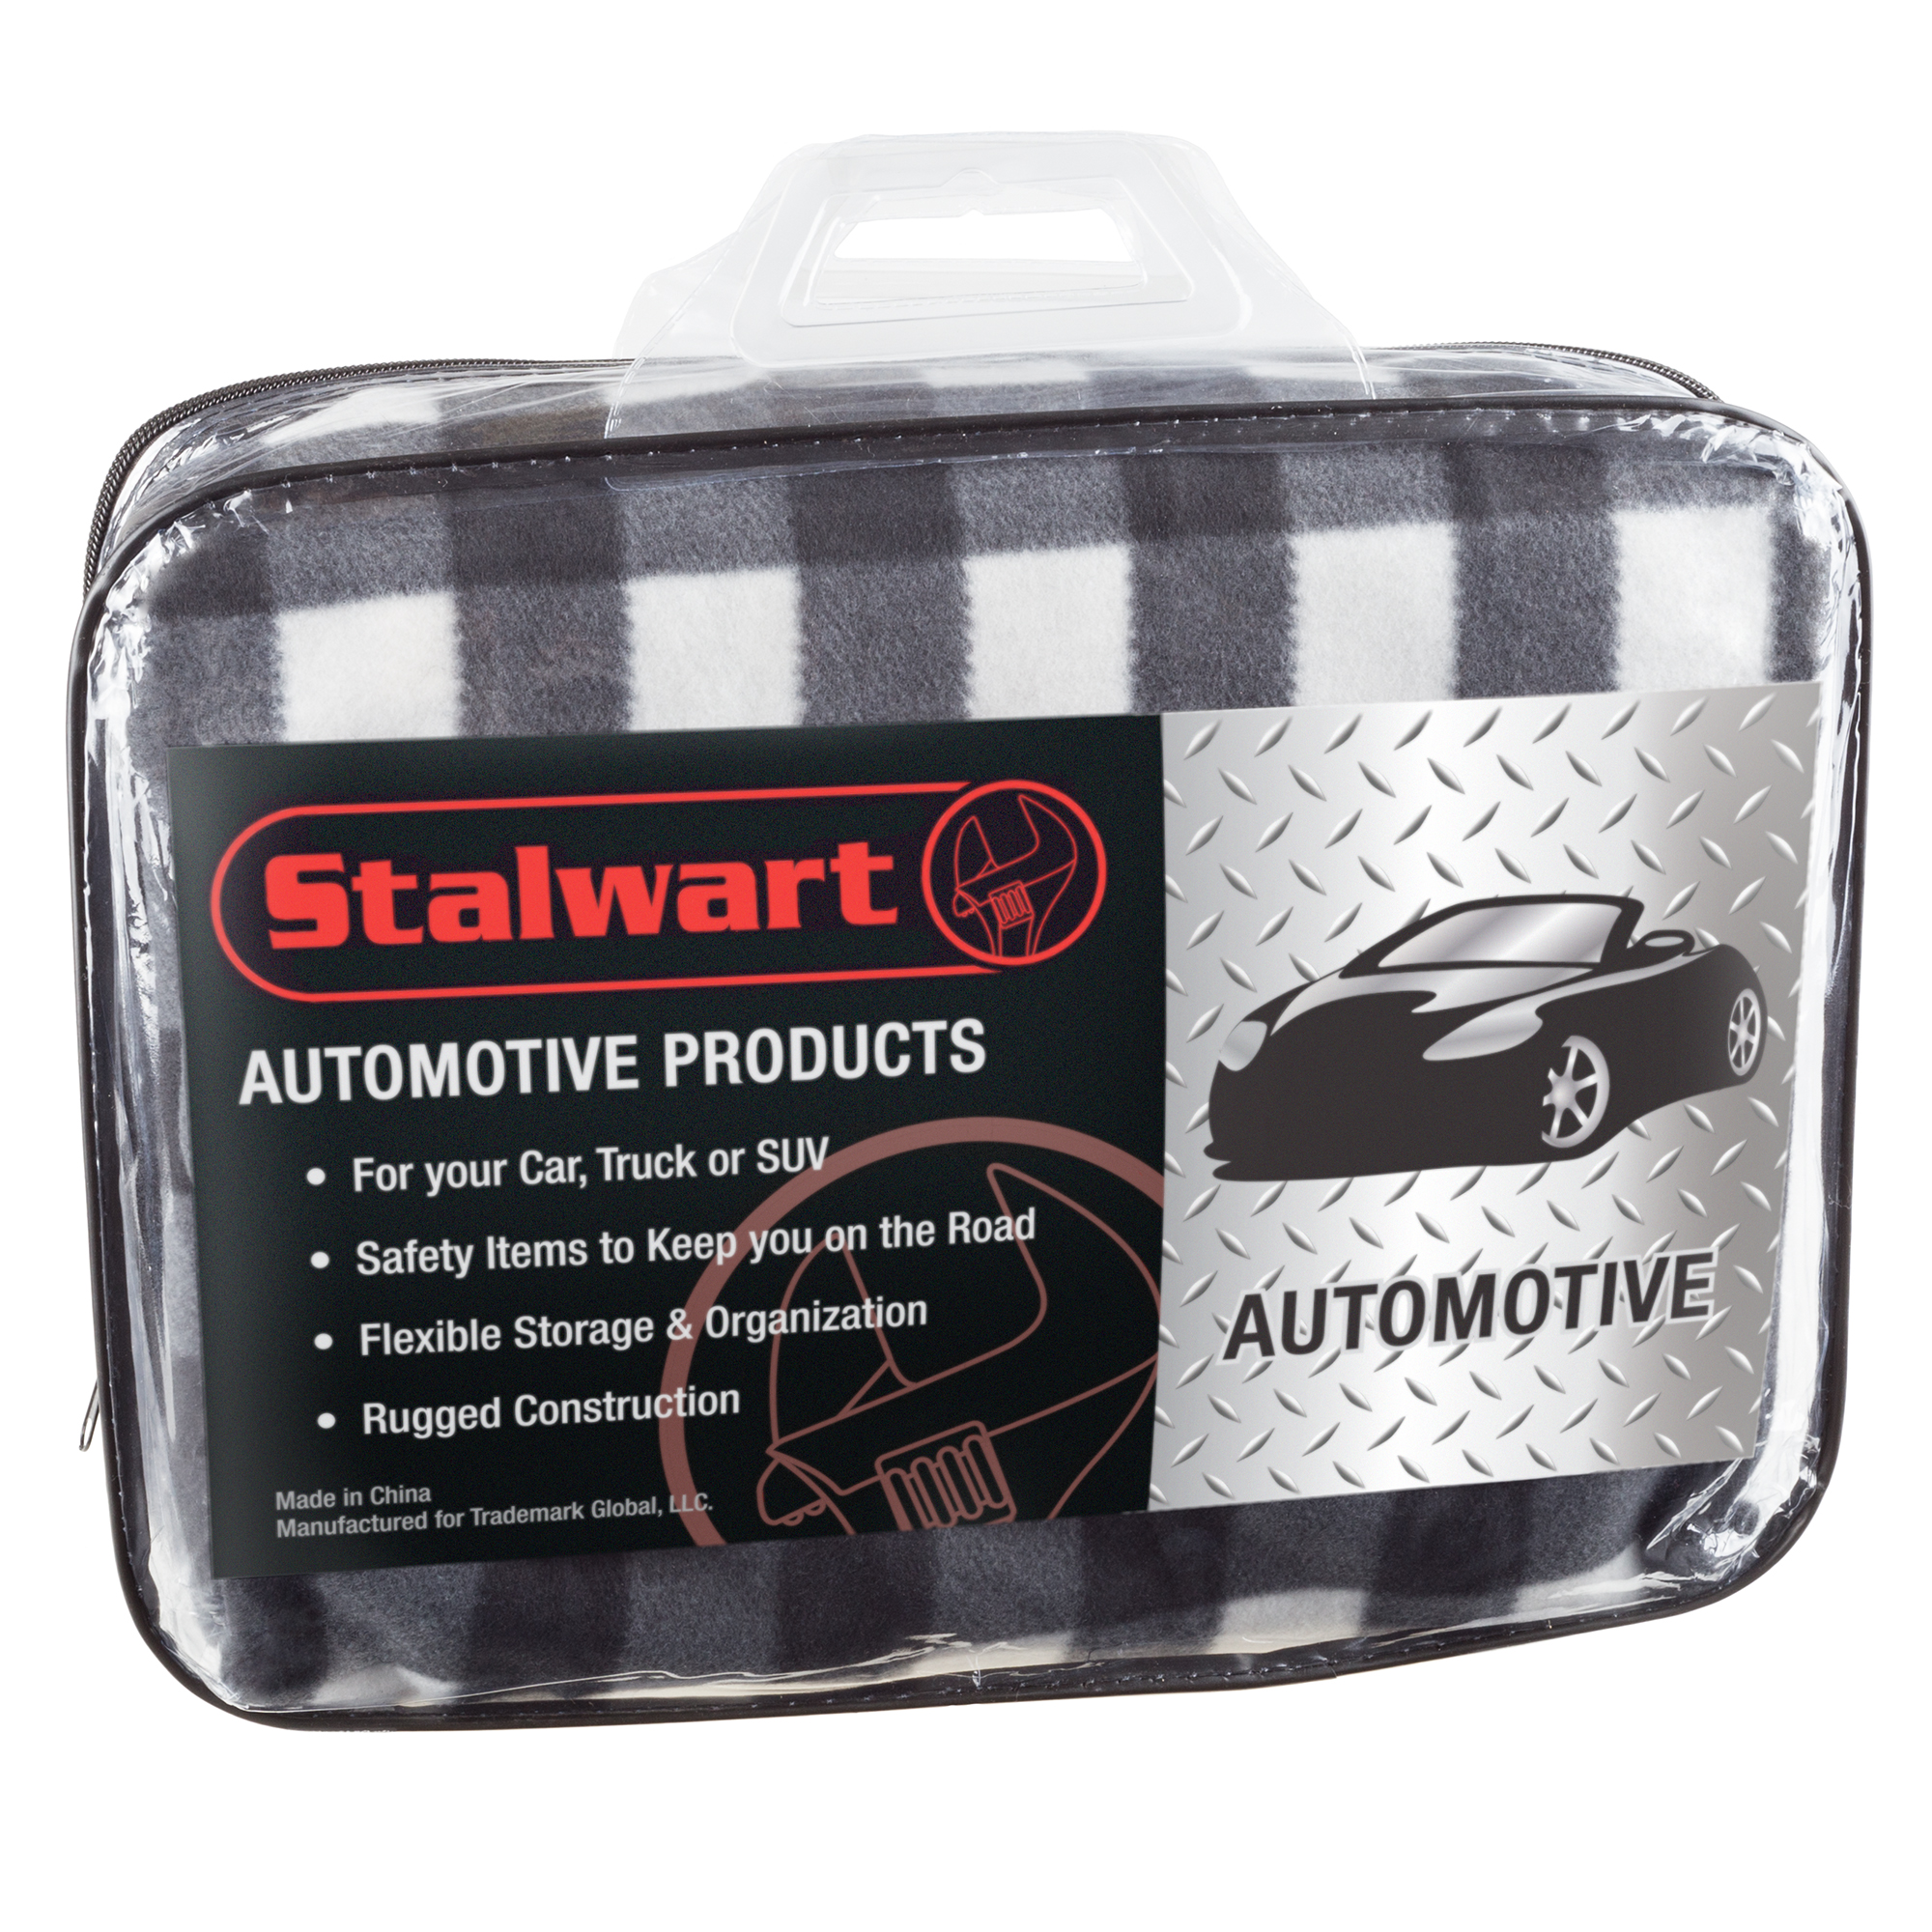 Stalwart Electric Car Blanket Heated 12V Polar Fleece Travel Throw for Truck and RV, Black and White - image 4 of 6